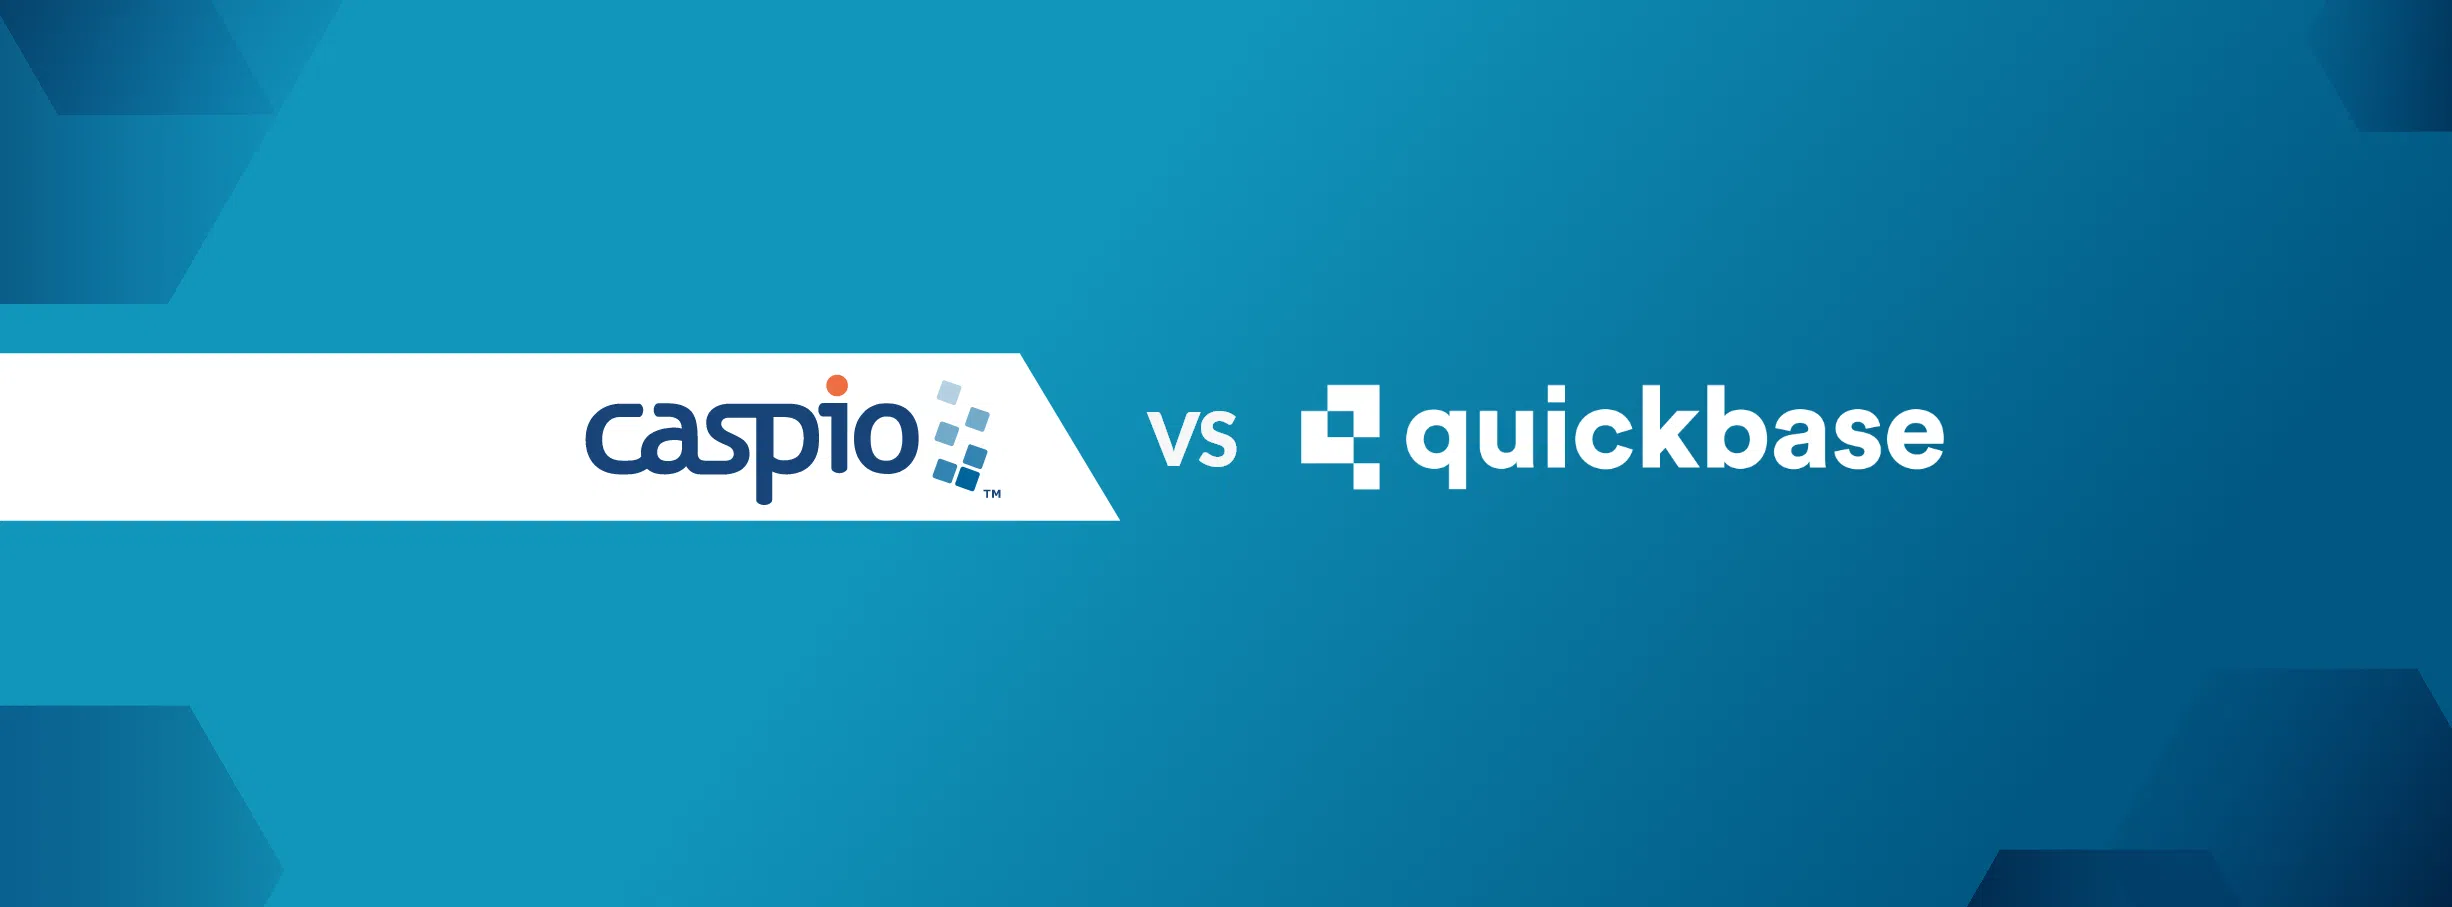 Top 5 Reasons to Switch From Quickbase to Caspio